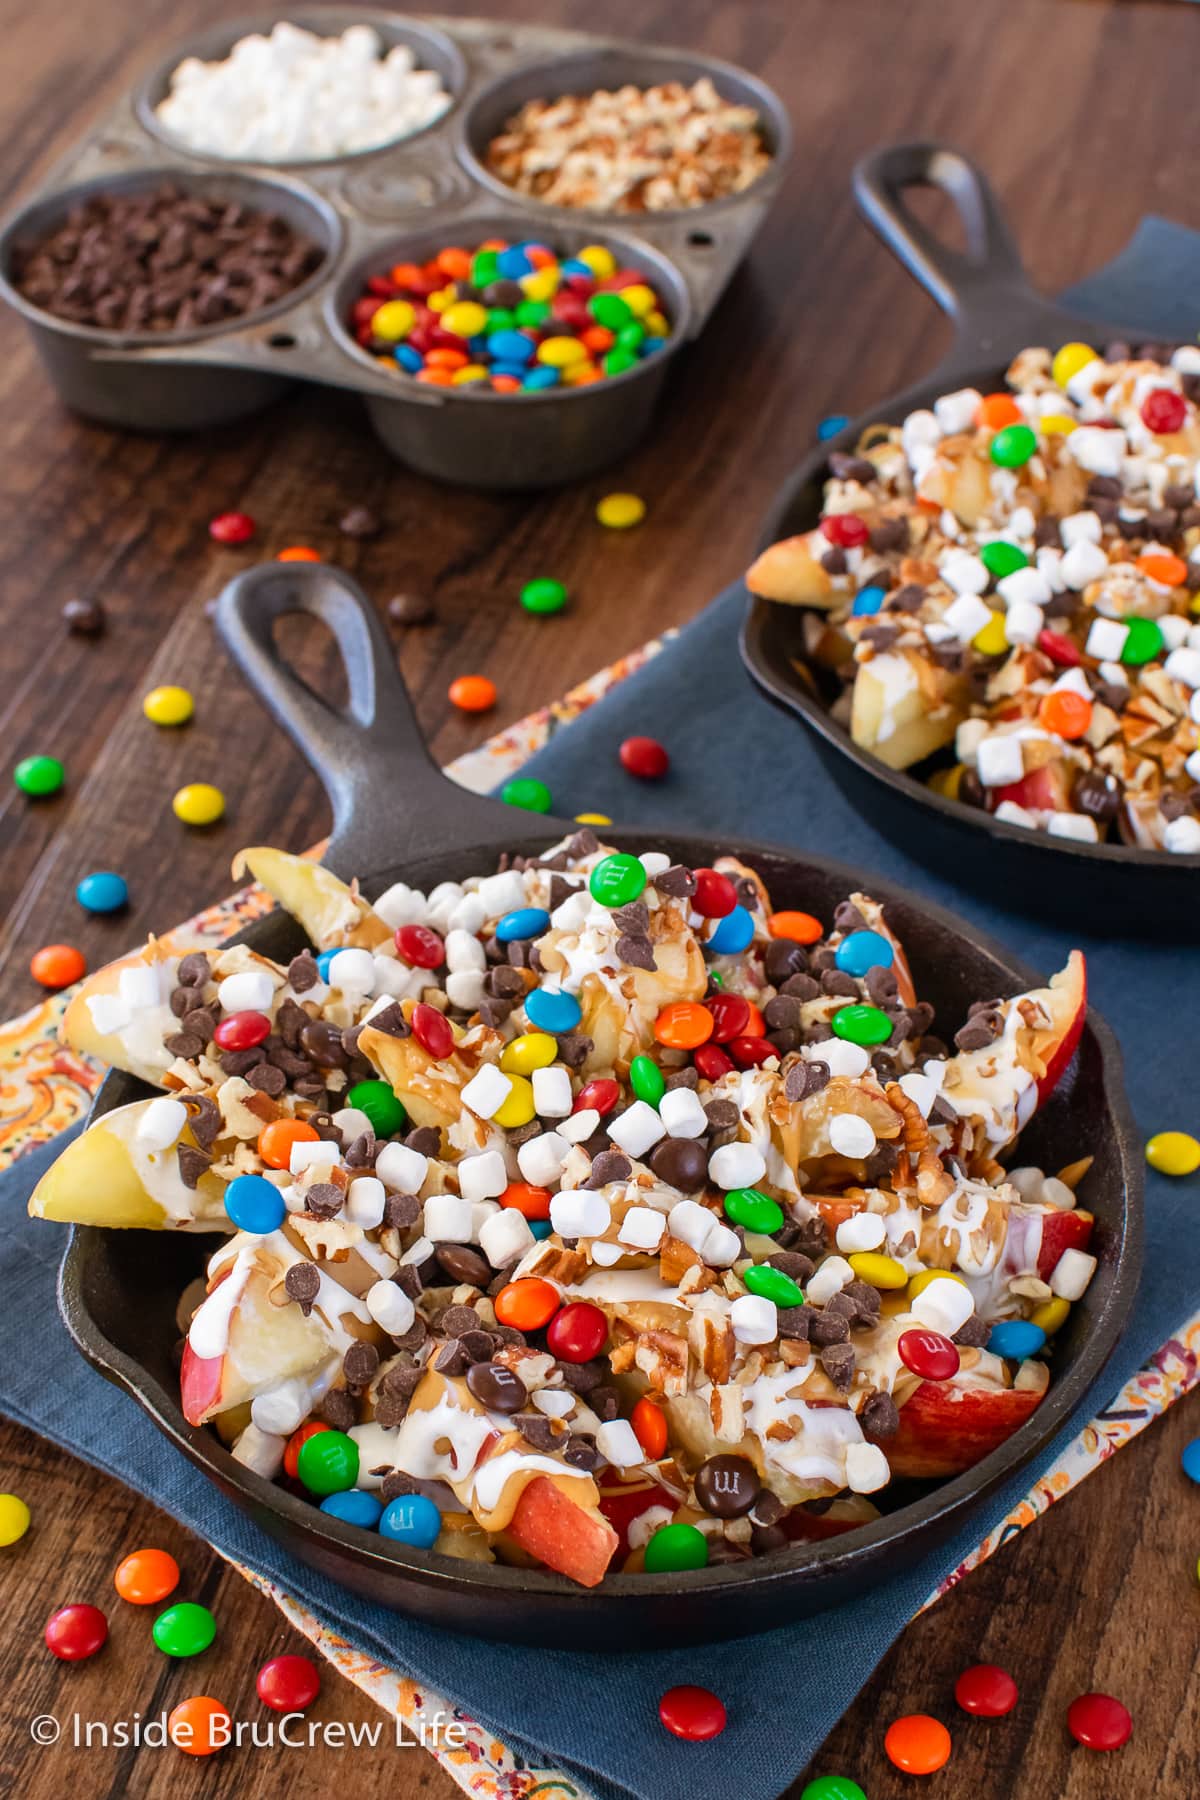 Two pans filled with apples and loaded with toppings.